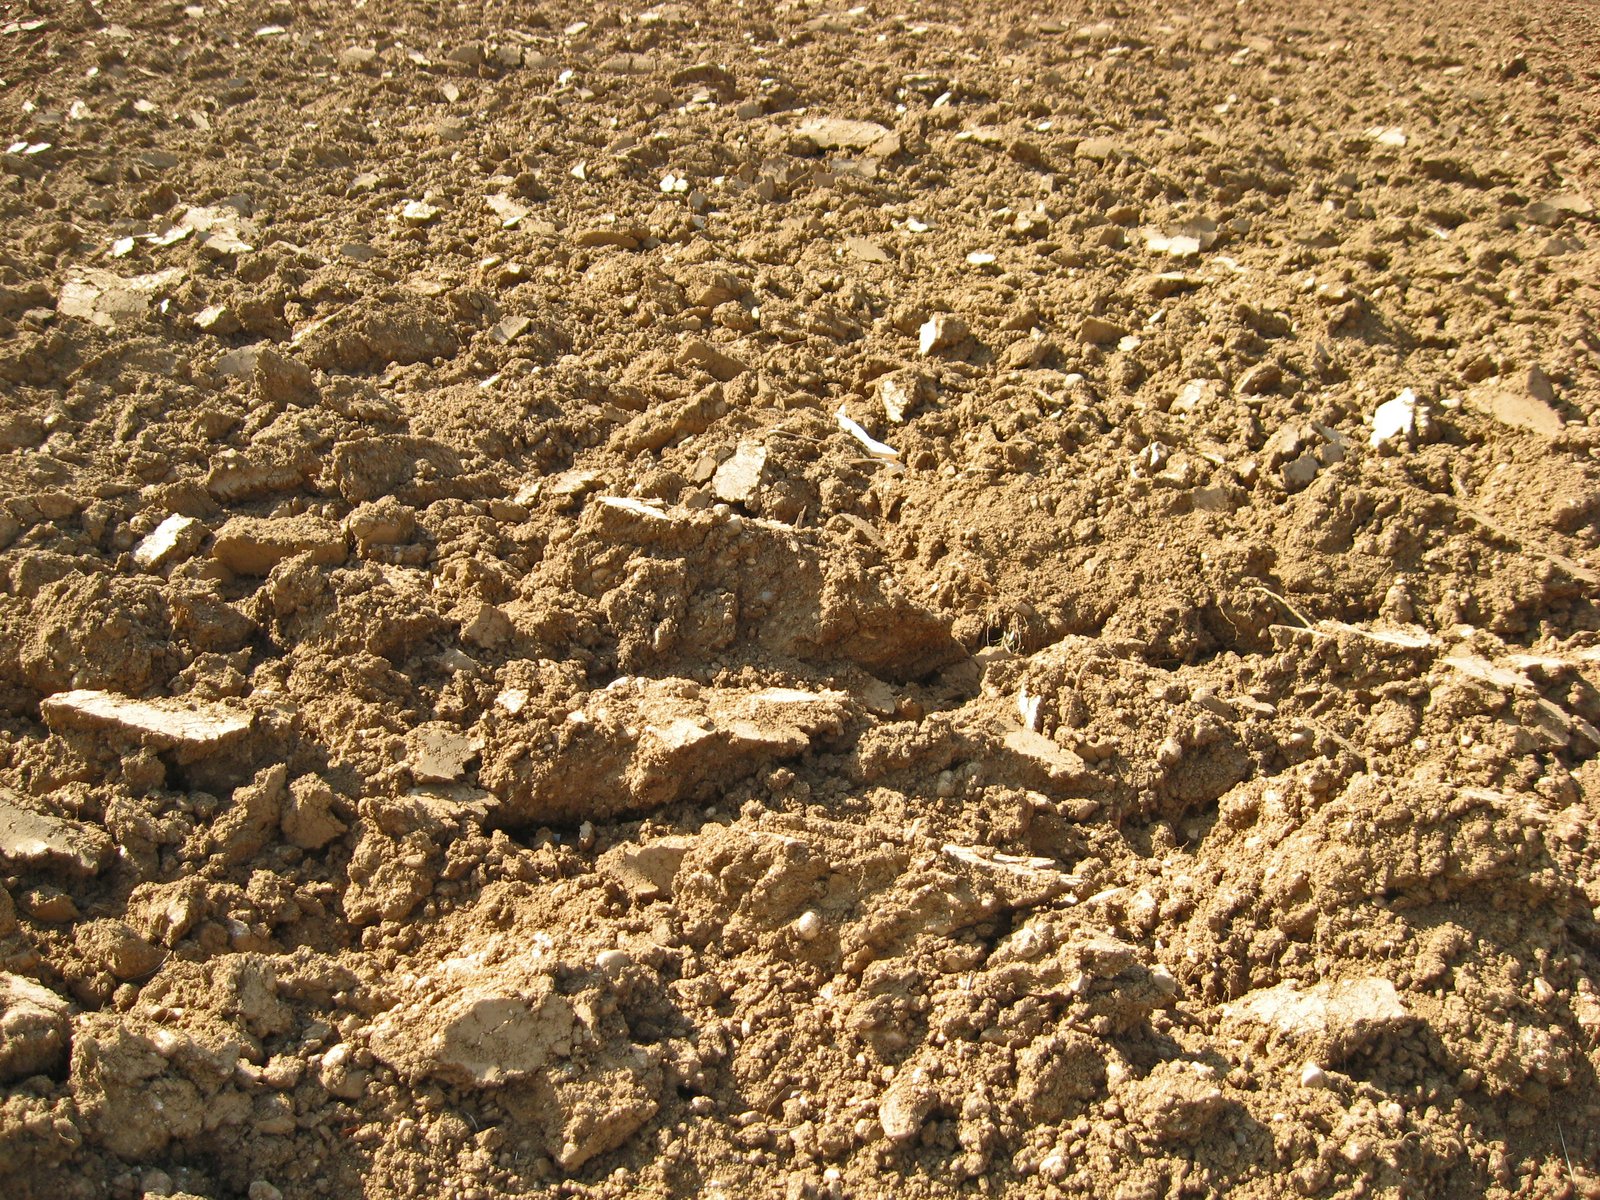 the remains of a well buried stone and gravel area